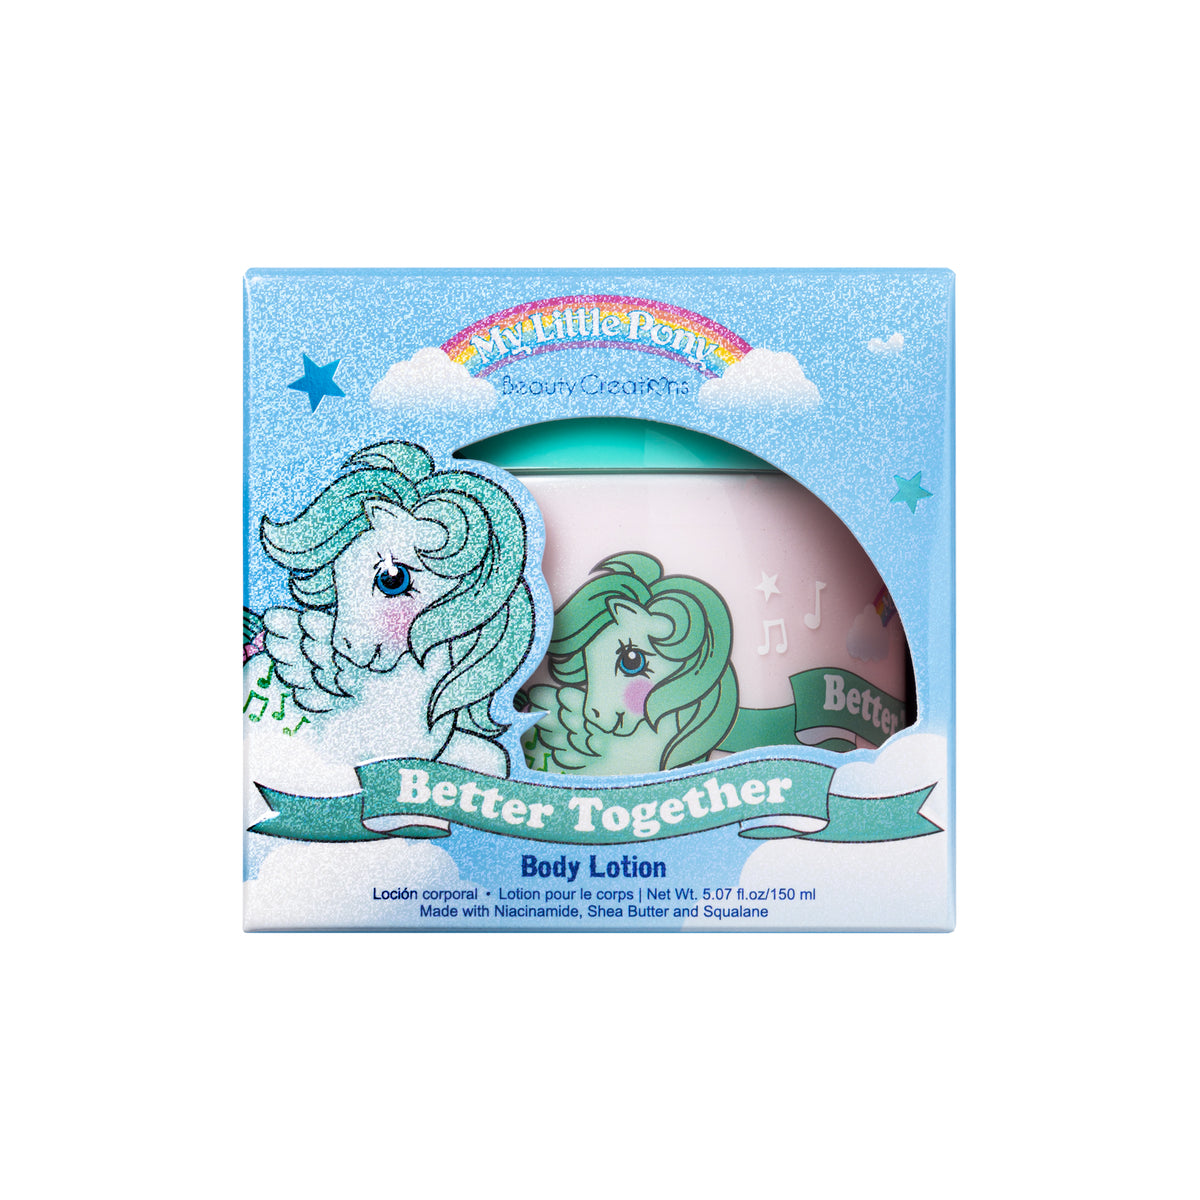 "BETTER TOGETHER" FLORAL BODY LOTION MY LITTLE PONY - BEAUTY CREATIONS